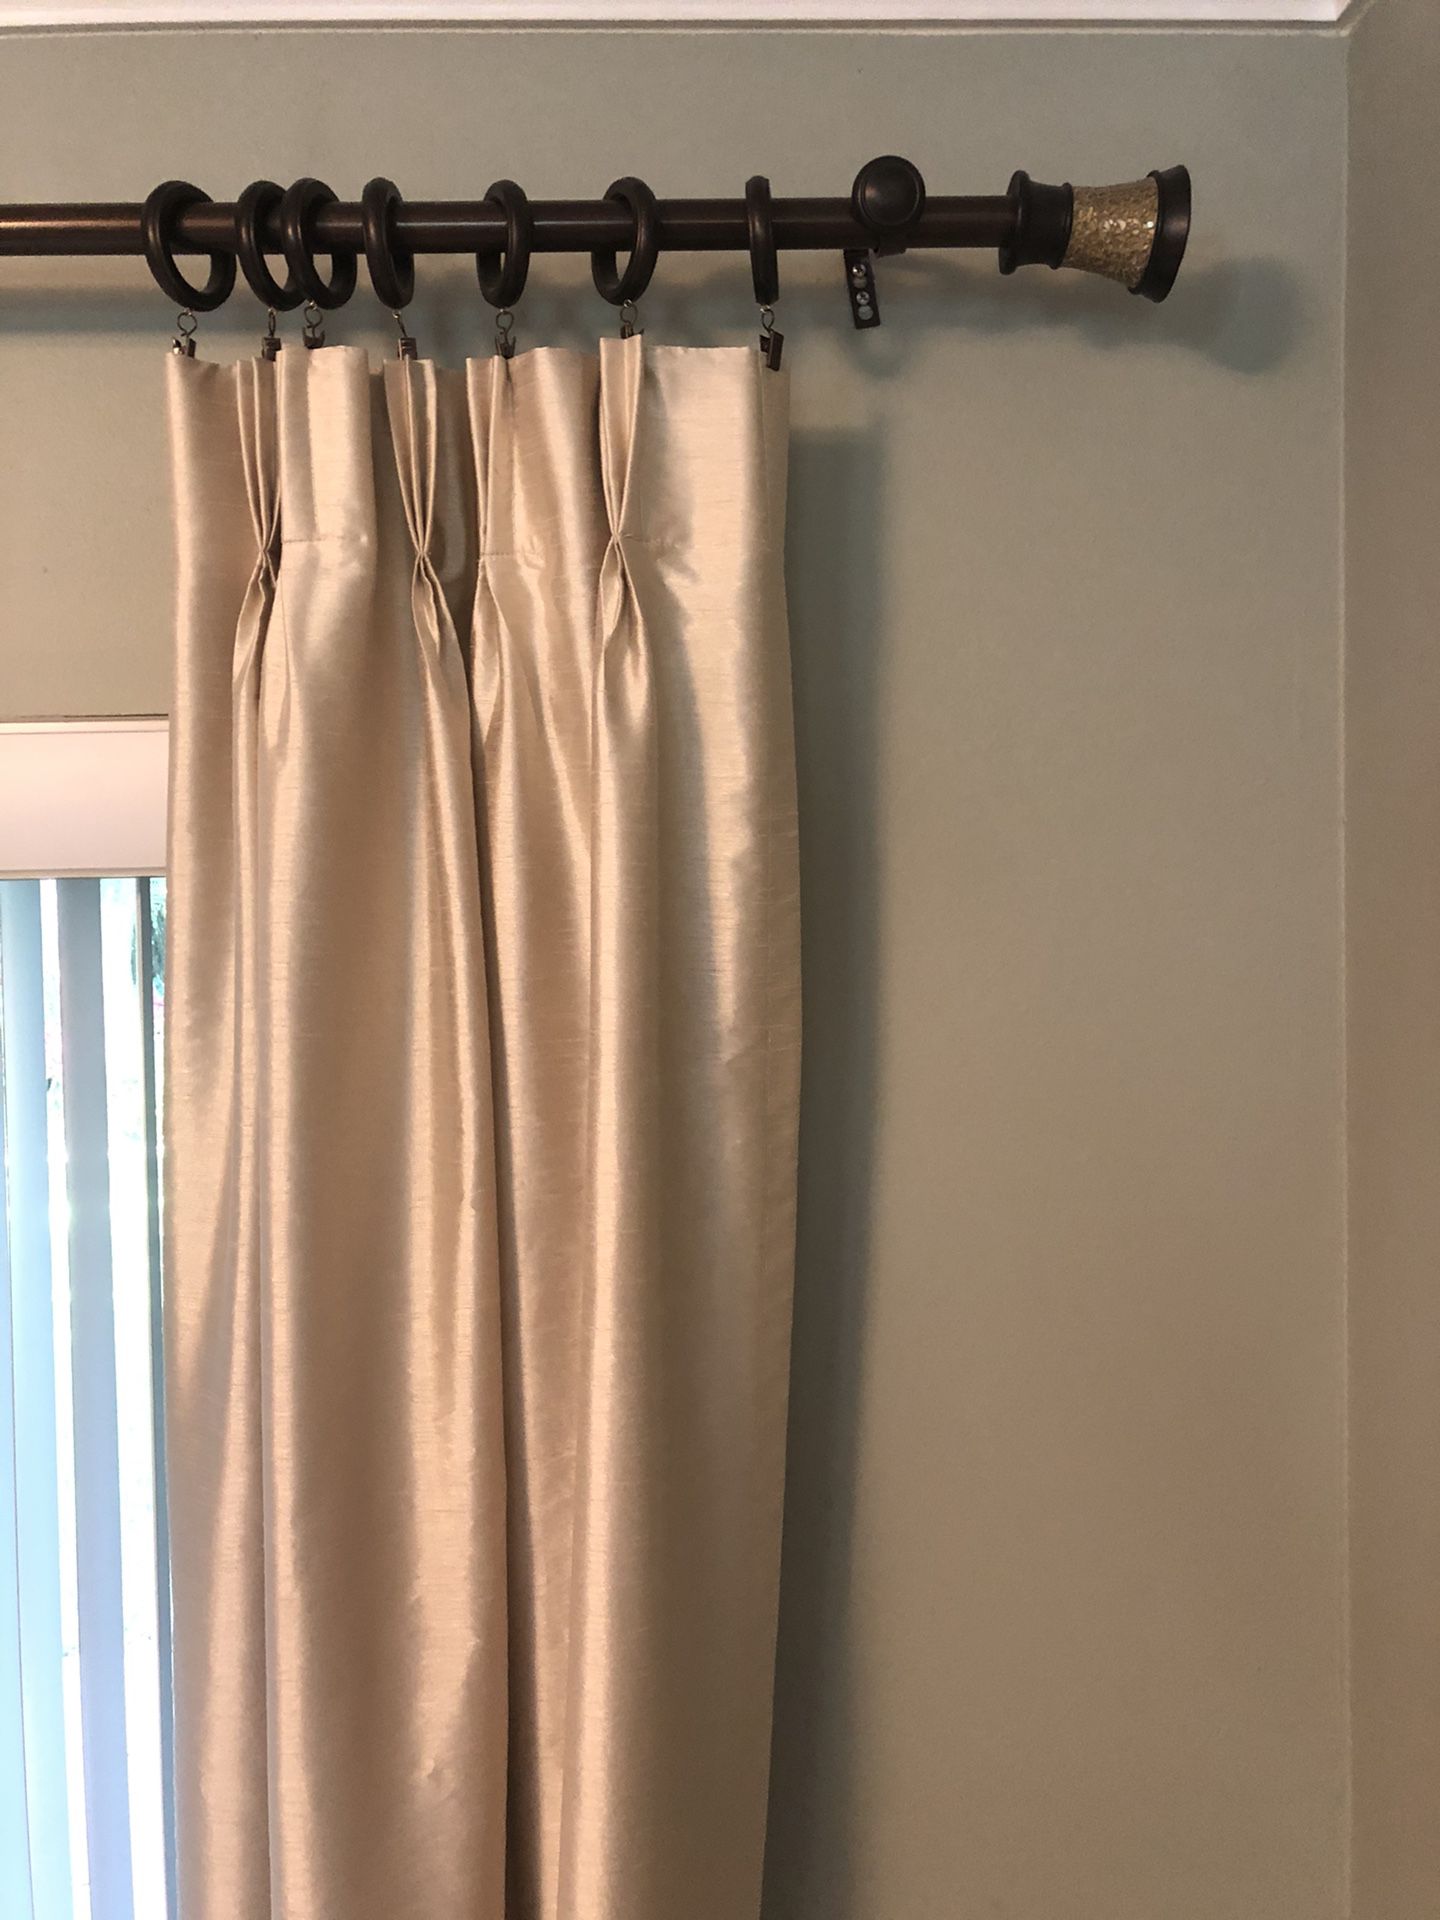 Window Curtains and Rods